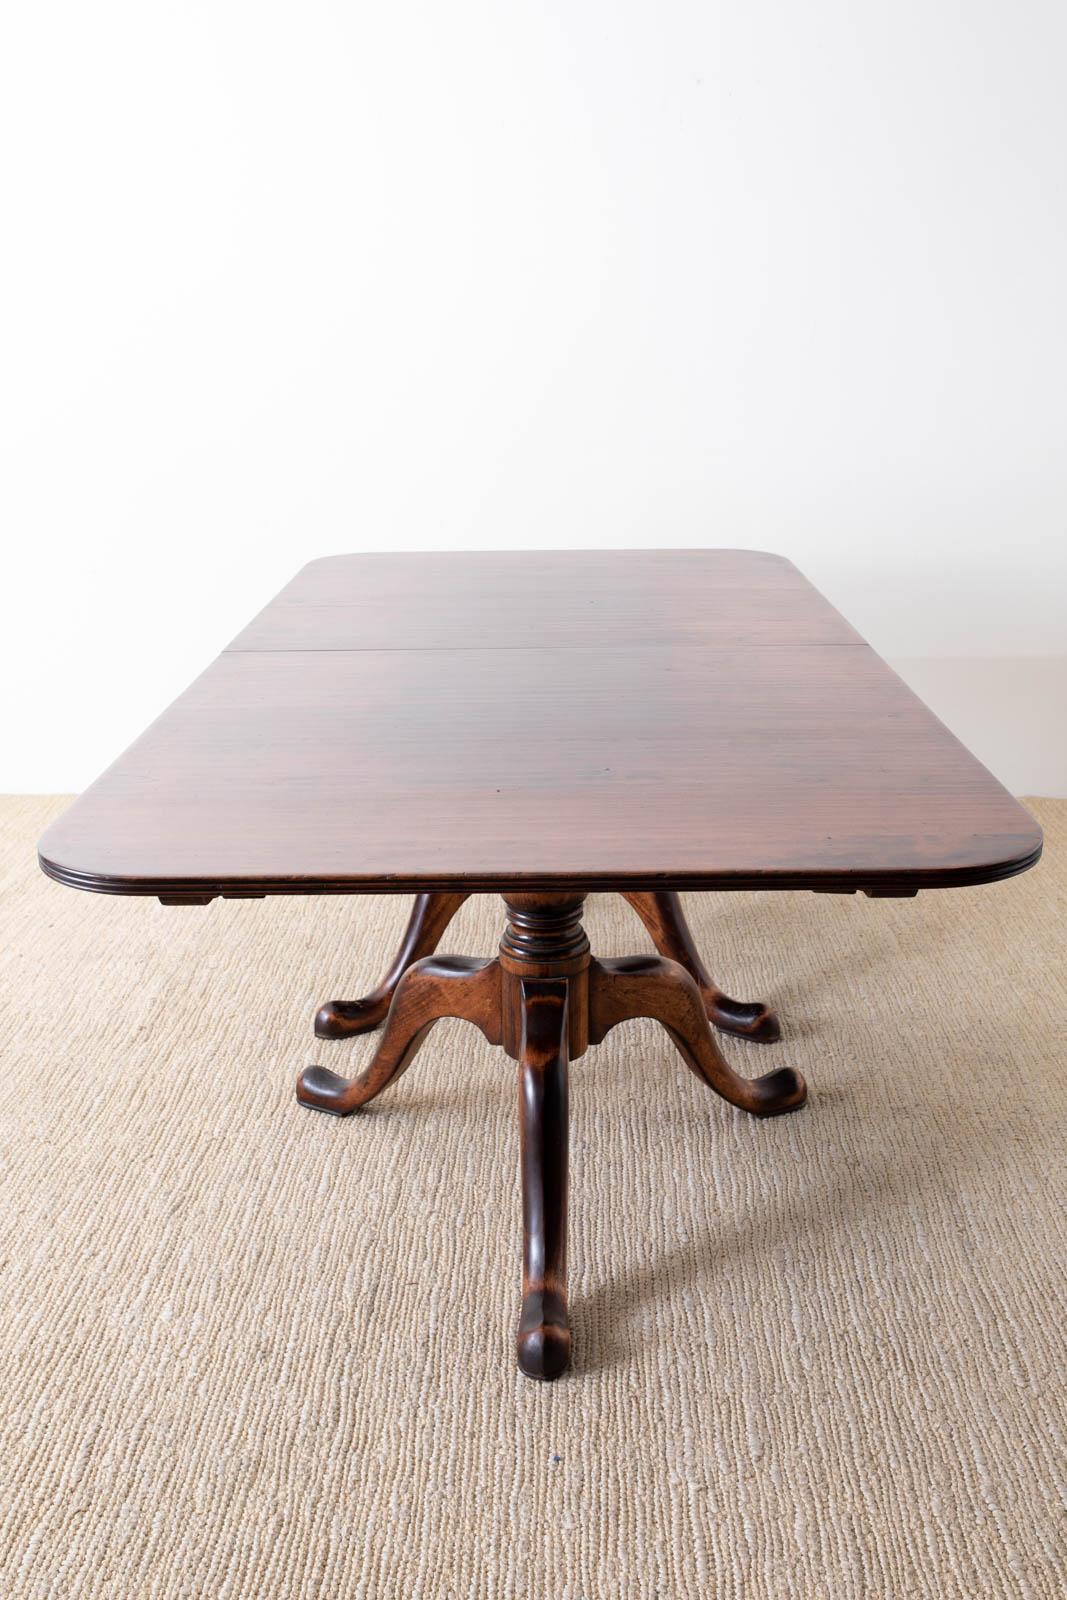 Hand-Crafted Georgian Style Double Pedestal Walnut Dining Table